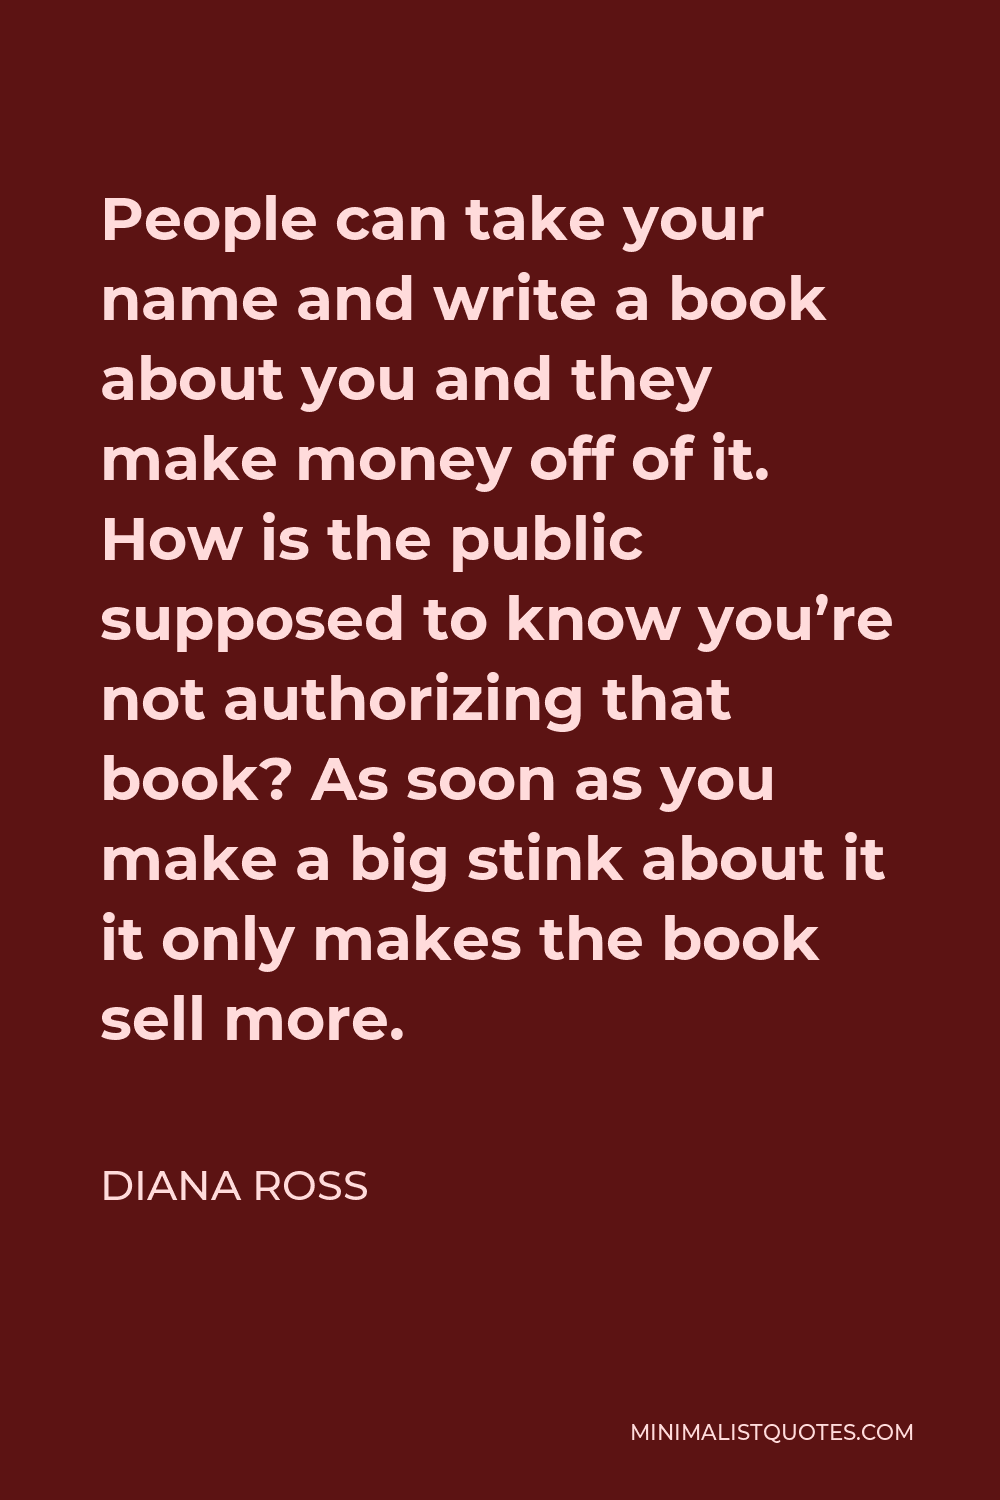 Diana Ross Quote - People can take your name and write a book about you and they make money off of it. How is the public supposed to know you’re not authorizing that book? As soon as you make a big stink about it it only makes the book sell more.